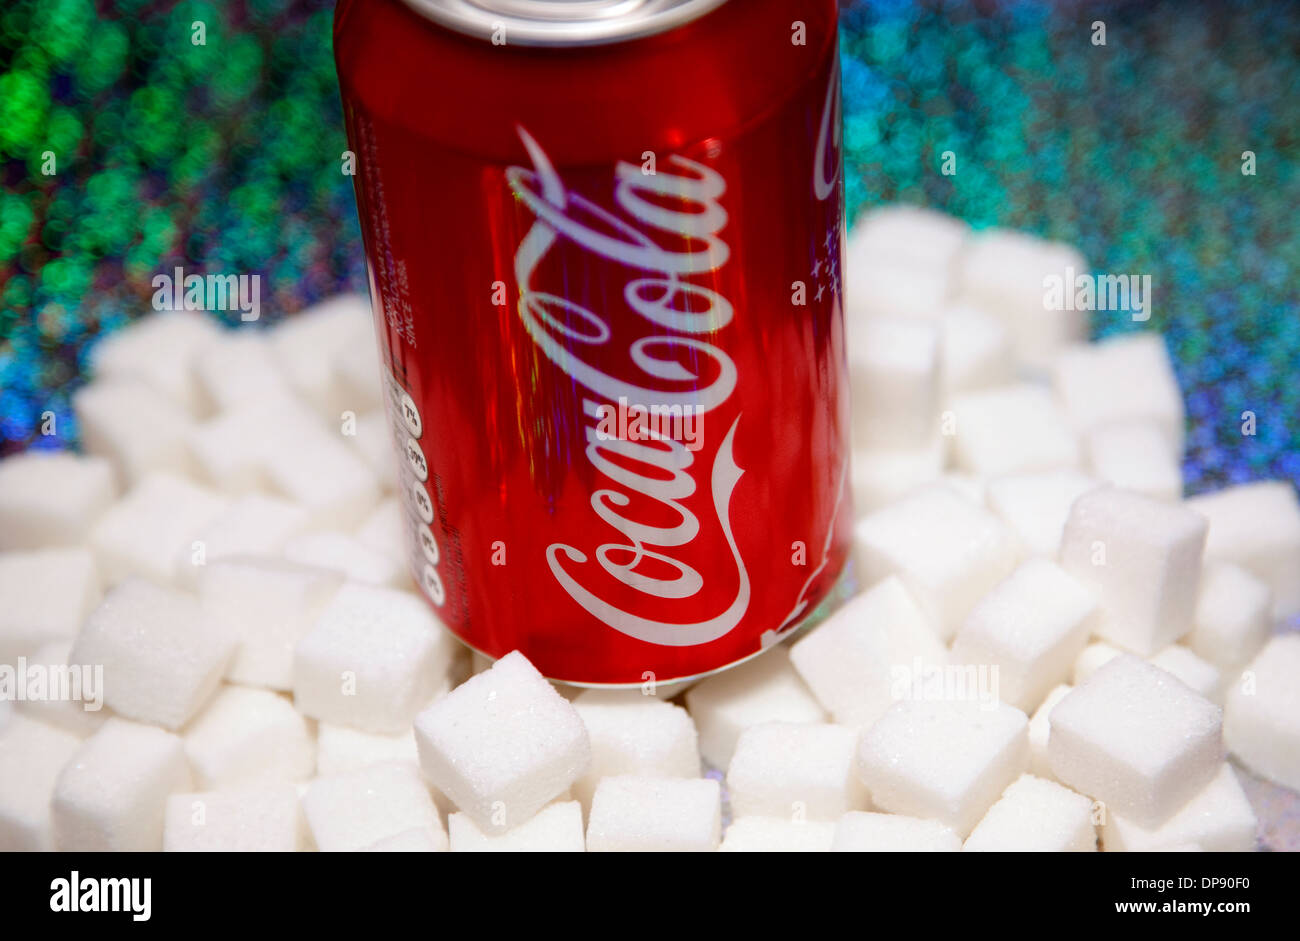 Coca-Cola contains large amount of sugar, London Stock Photo